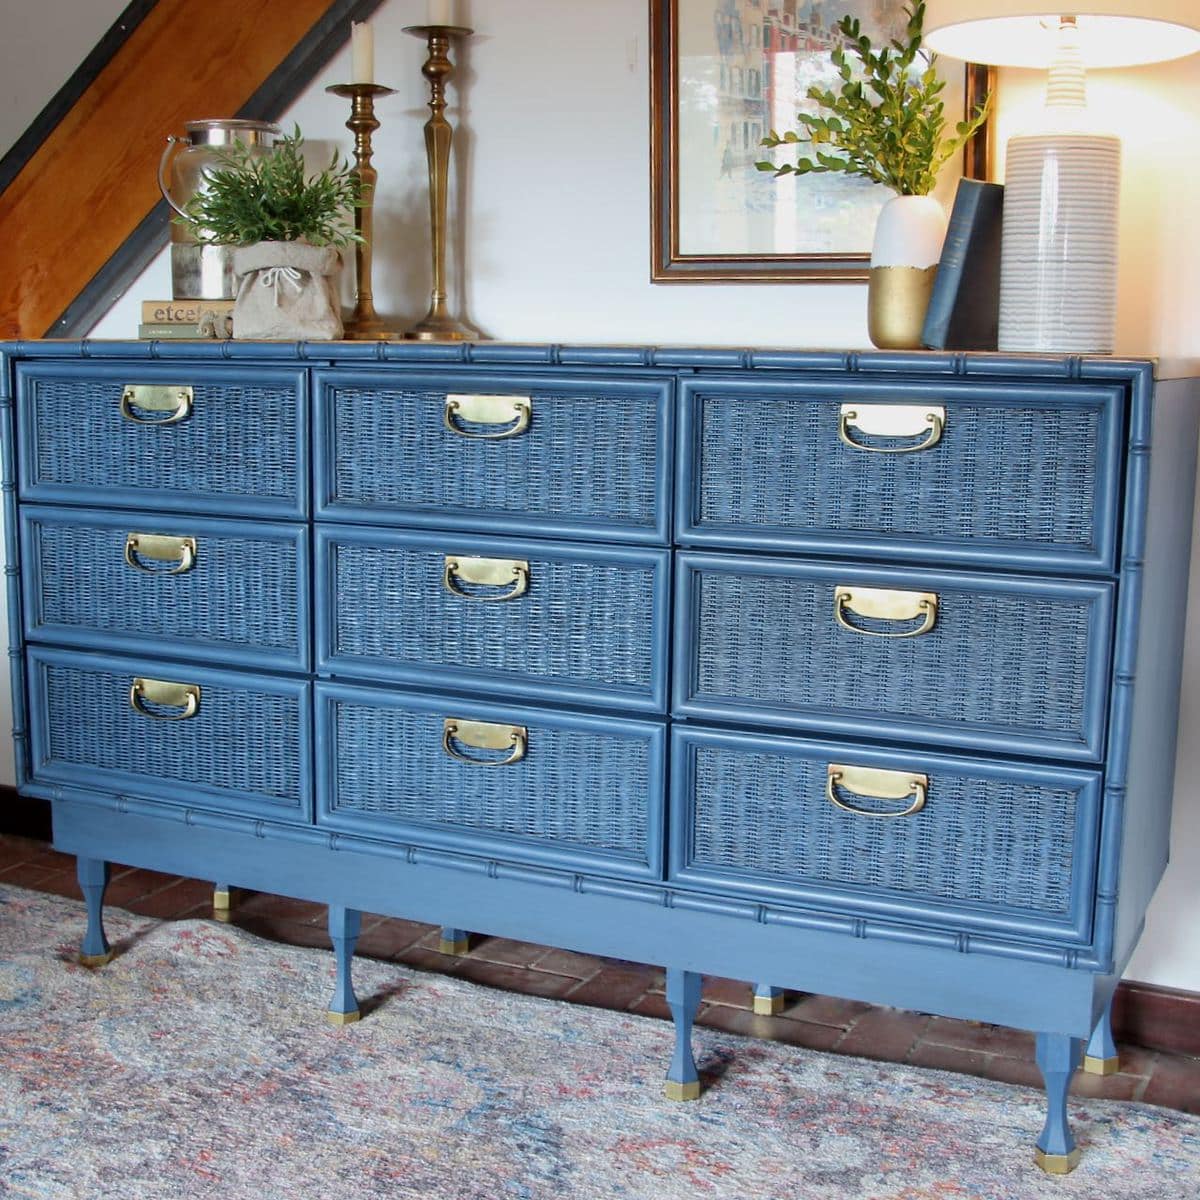 View of painted wicker chest with added legs and shiny brass pulls